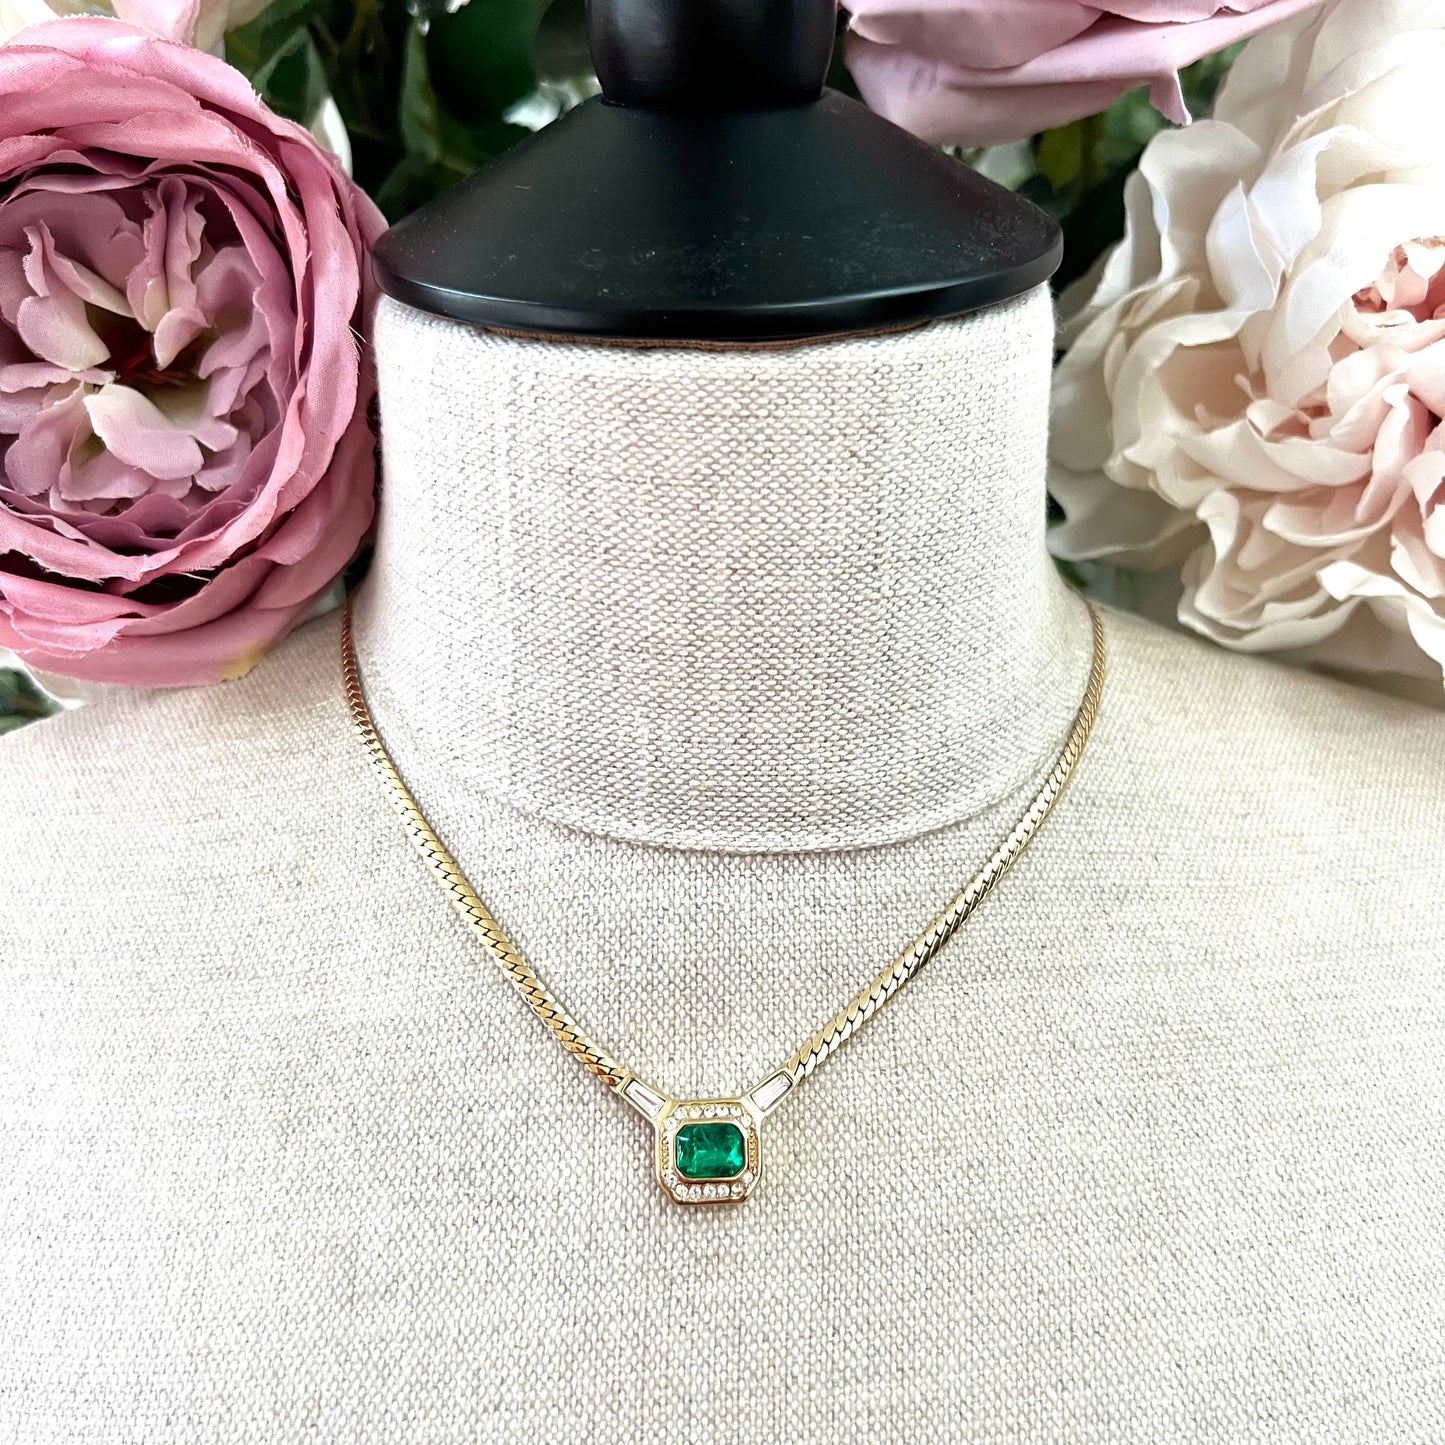 Christian Dior Germany 22ct Gold Plated Flawed Emerald and Crystal Integral Pendant Necklace In Original Box with Original Tag